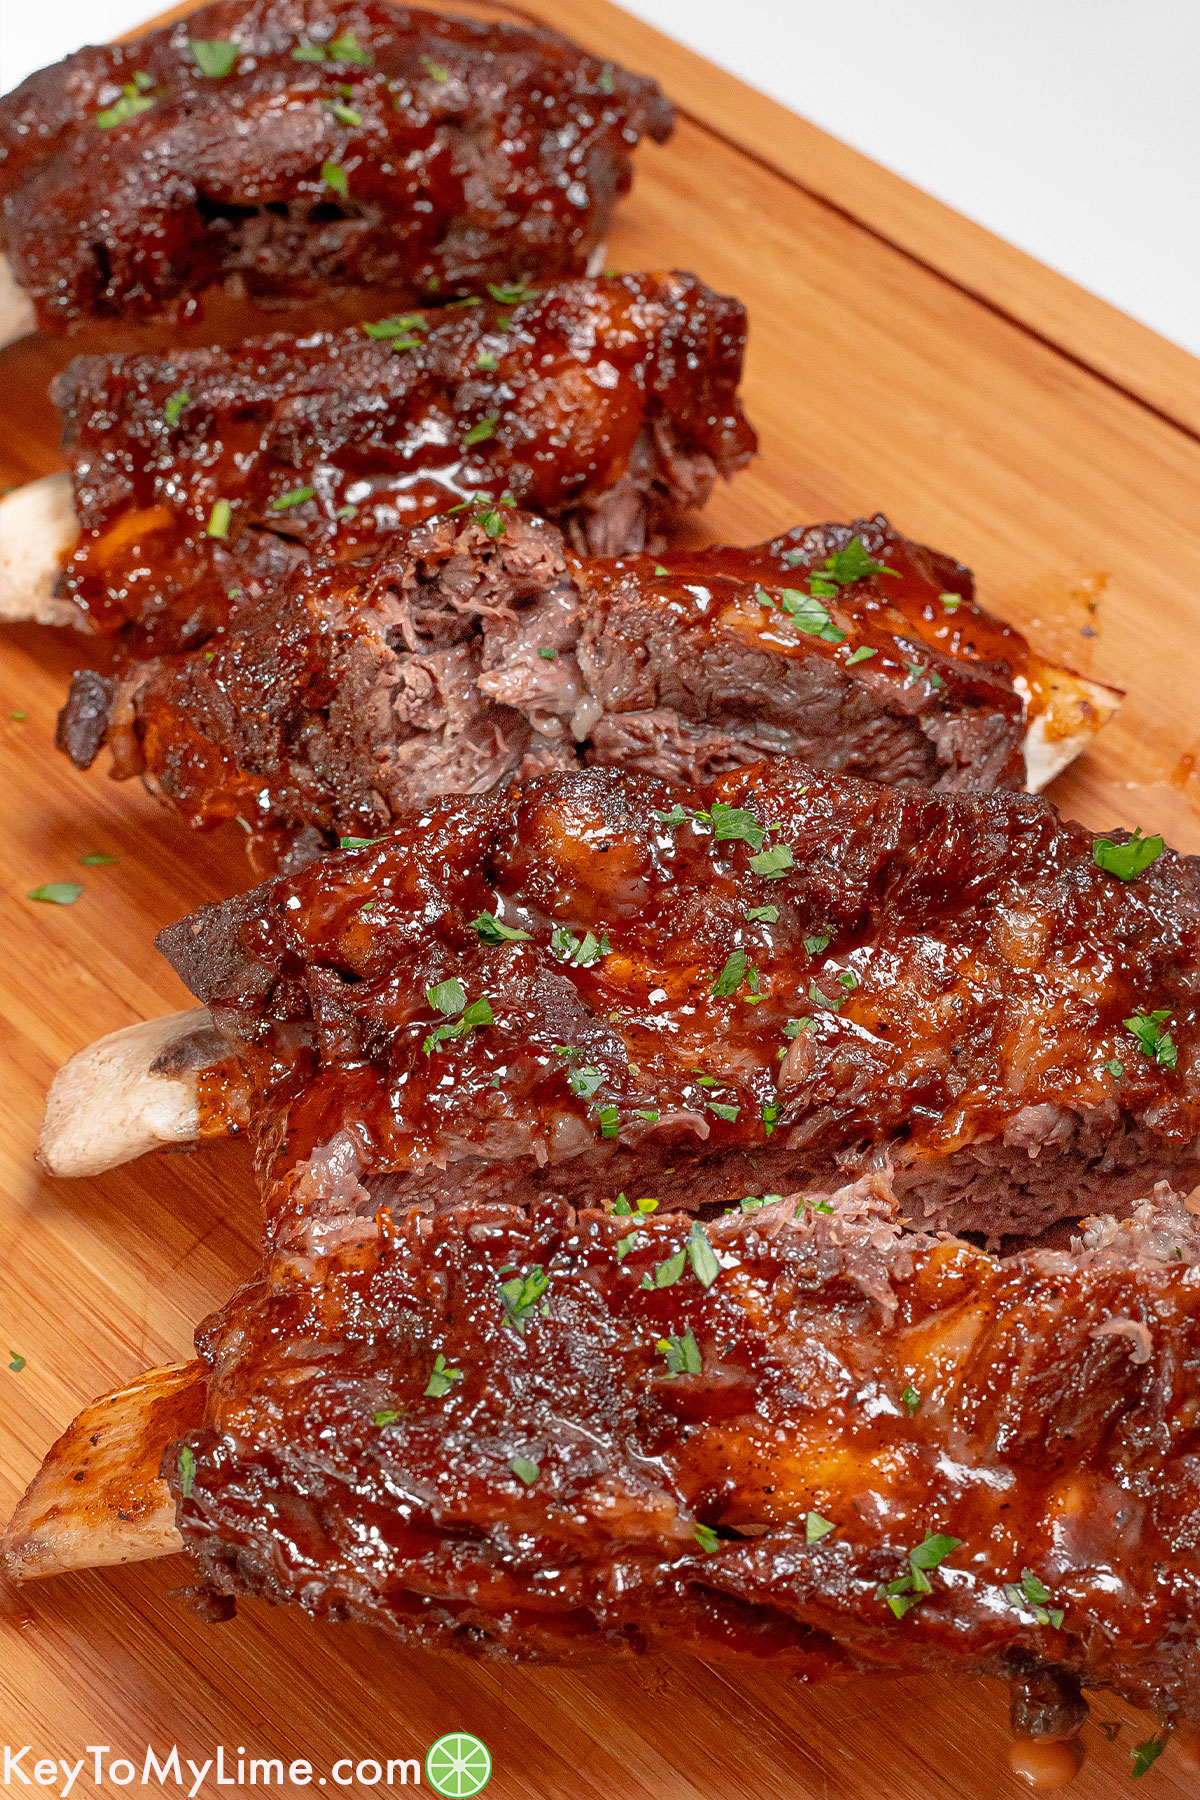 A side image of fully cooked beef ribs garnished with fresh parsley on top.